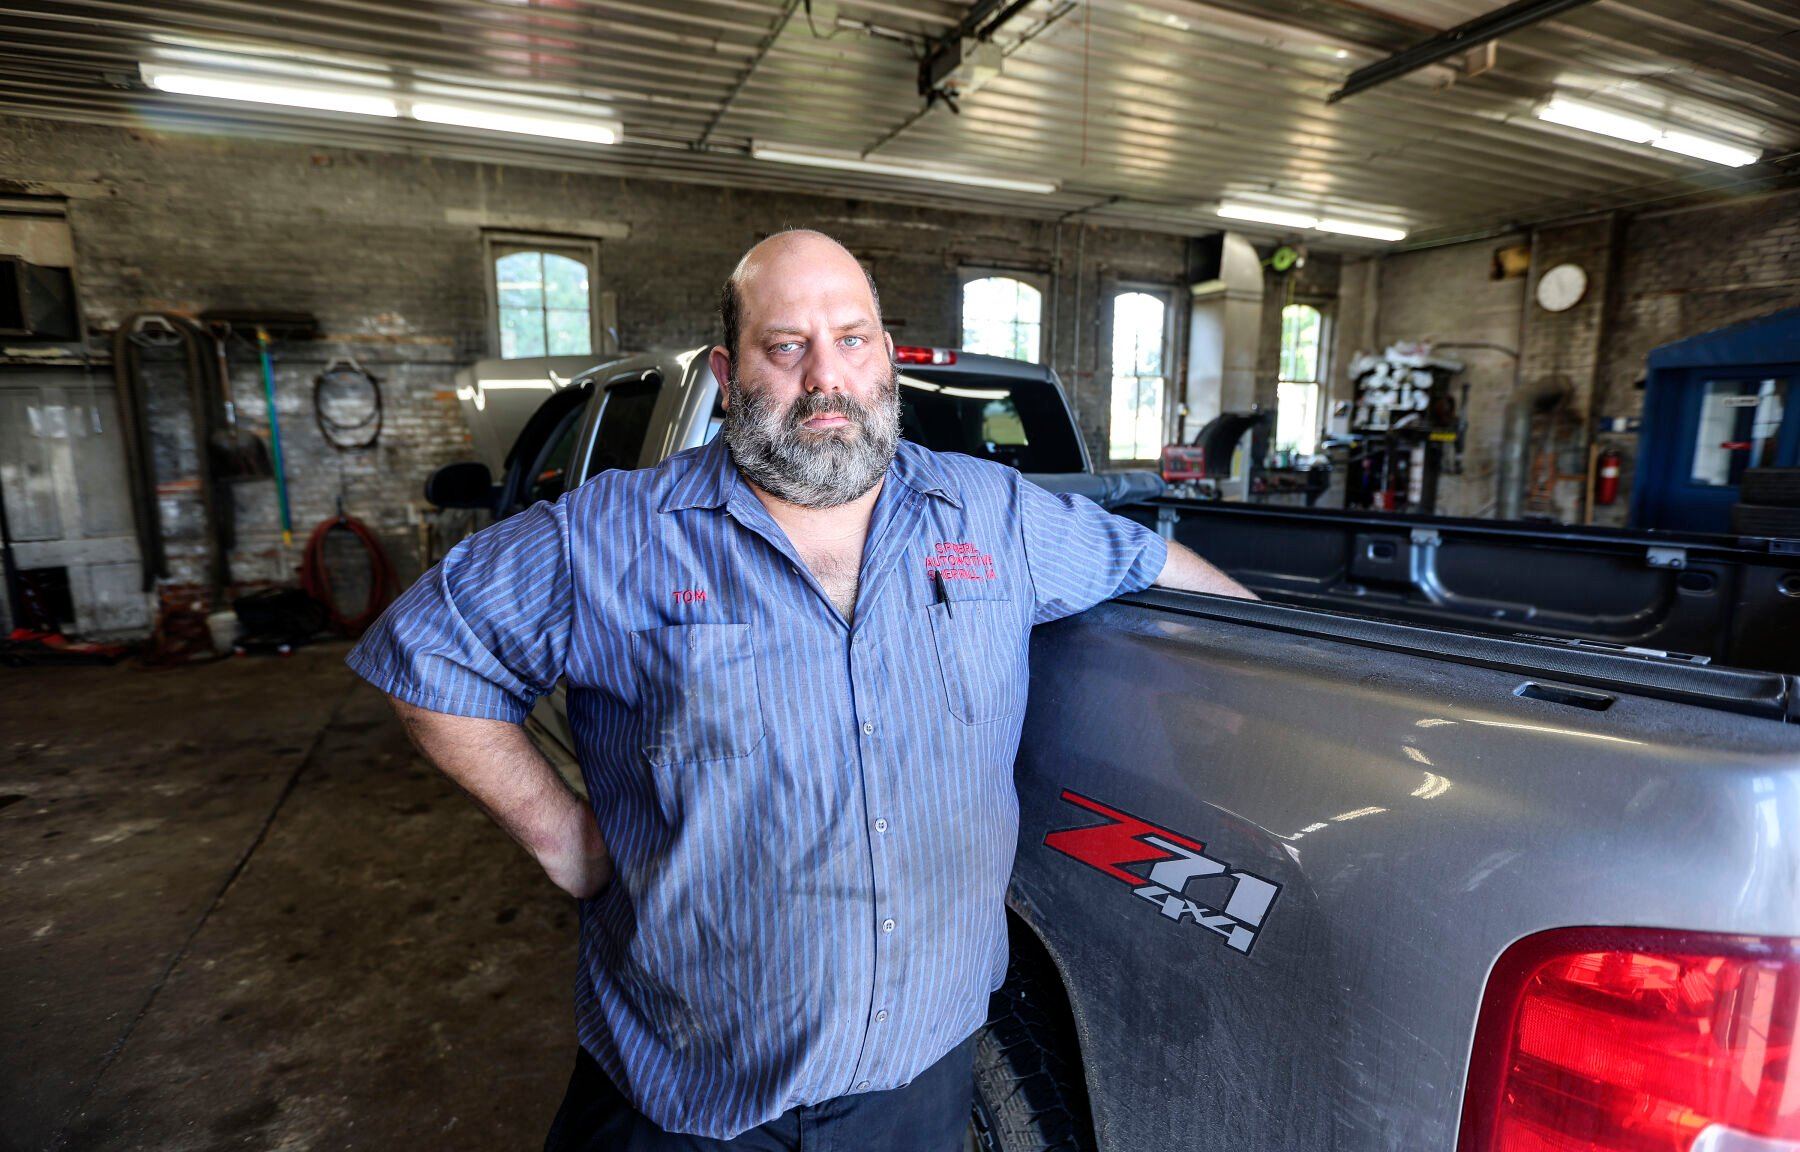 Spoerl Automotive in Sherrill, Iowa, has been operating at the same location since 1917. Tom Spoerl is the fourth generation of mechanics.    PHOTO CREDIT: Dave Kettering
Telegraph Herald